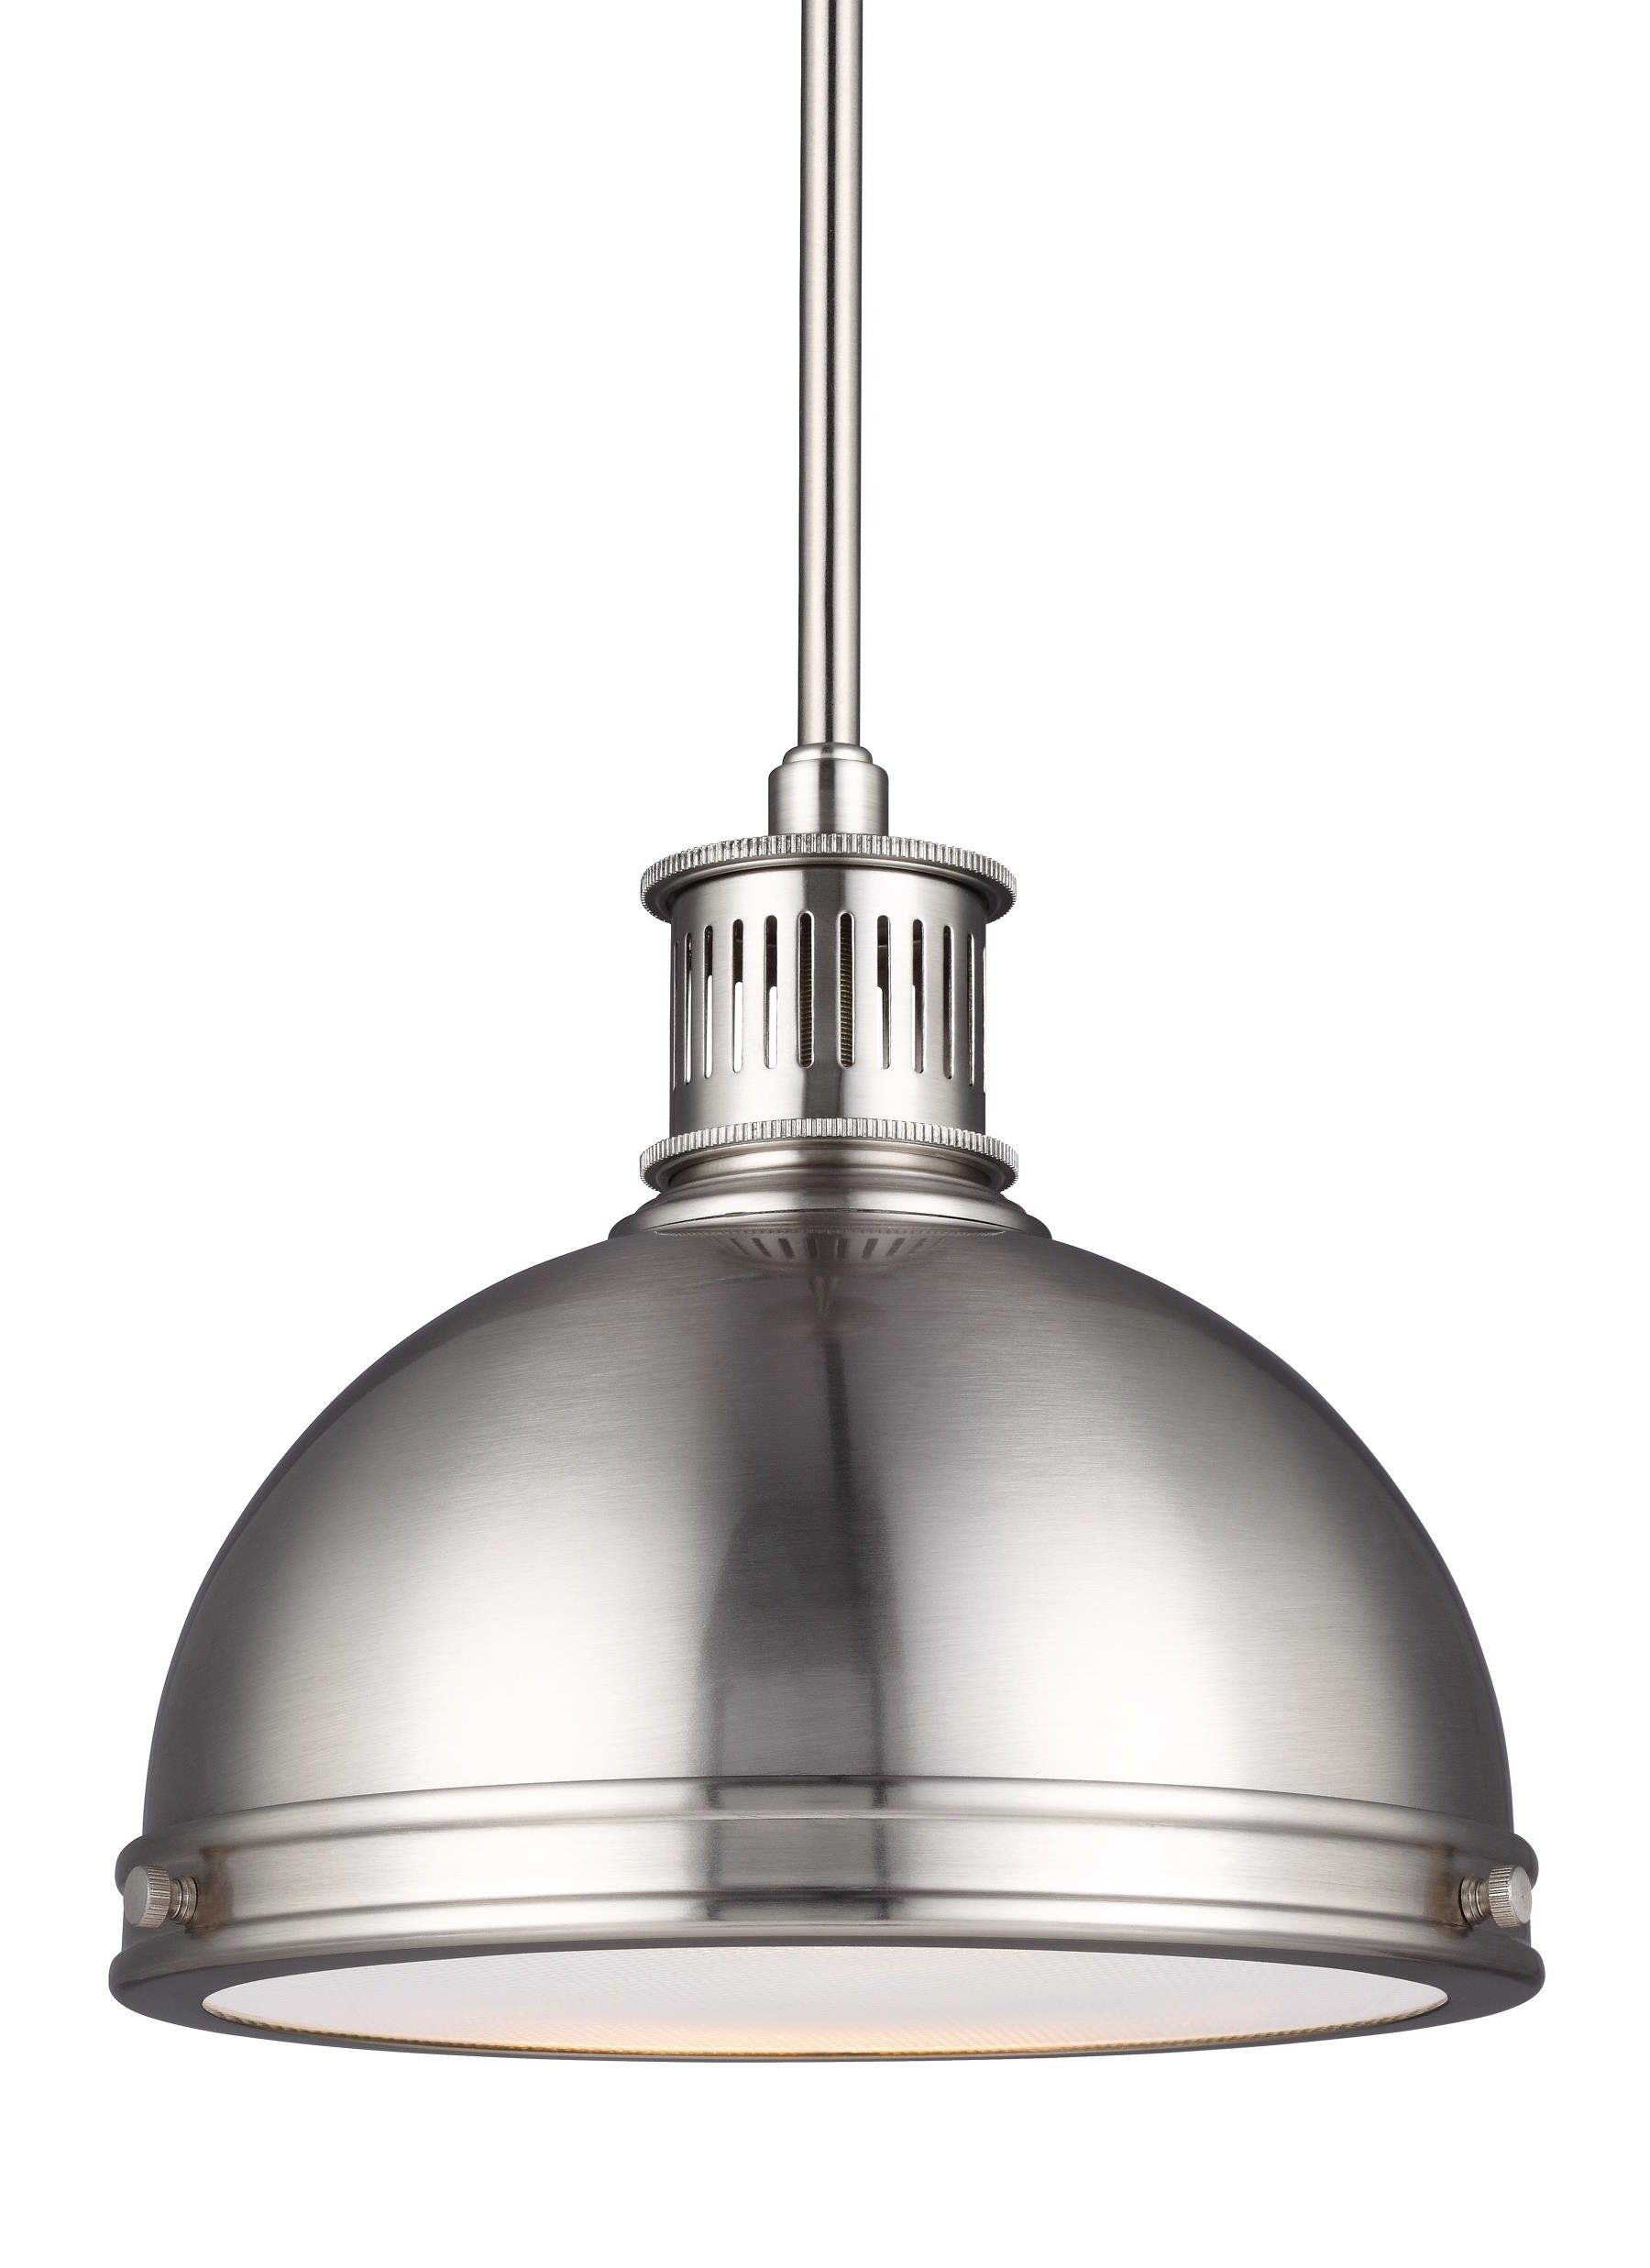 Orchard Hill 1 Light Led Dome Pendant Intended For Most Up To Date Southlake 1 Light Single Dome Pendants (View 24 of 25)